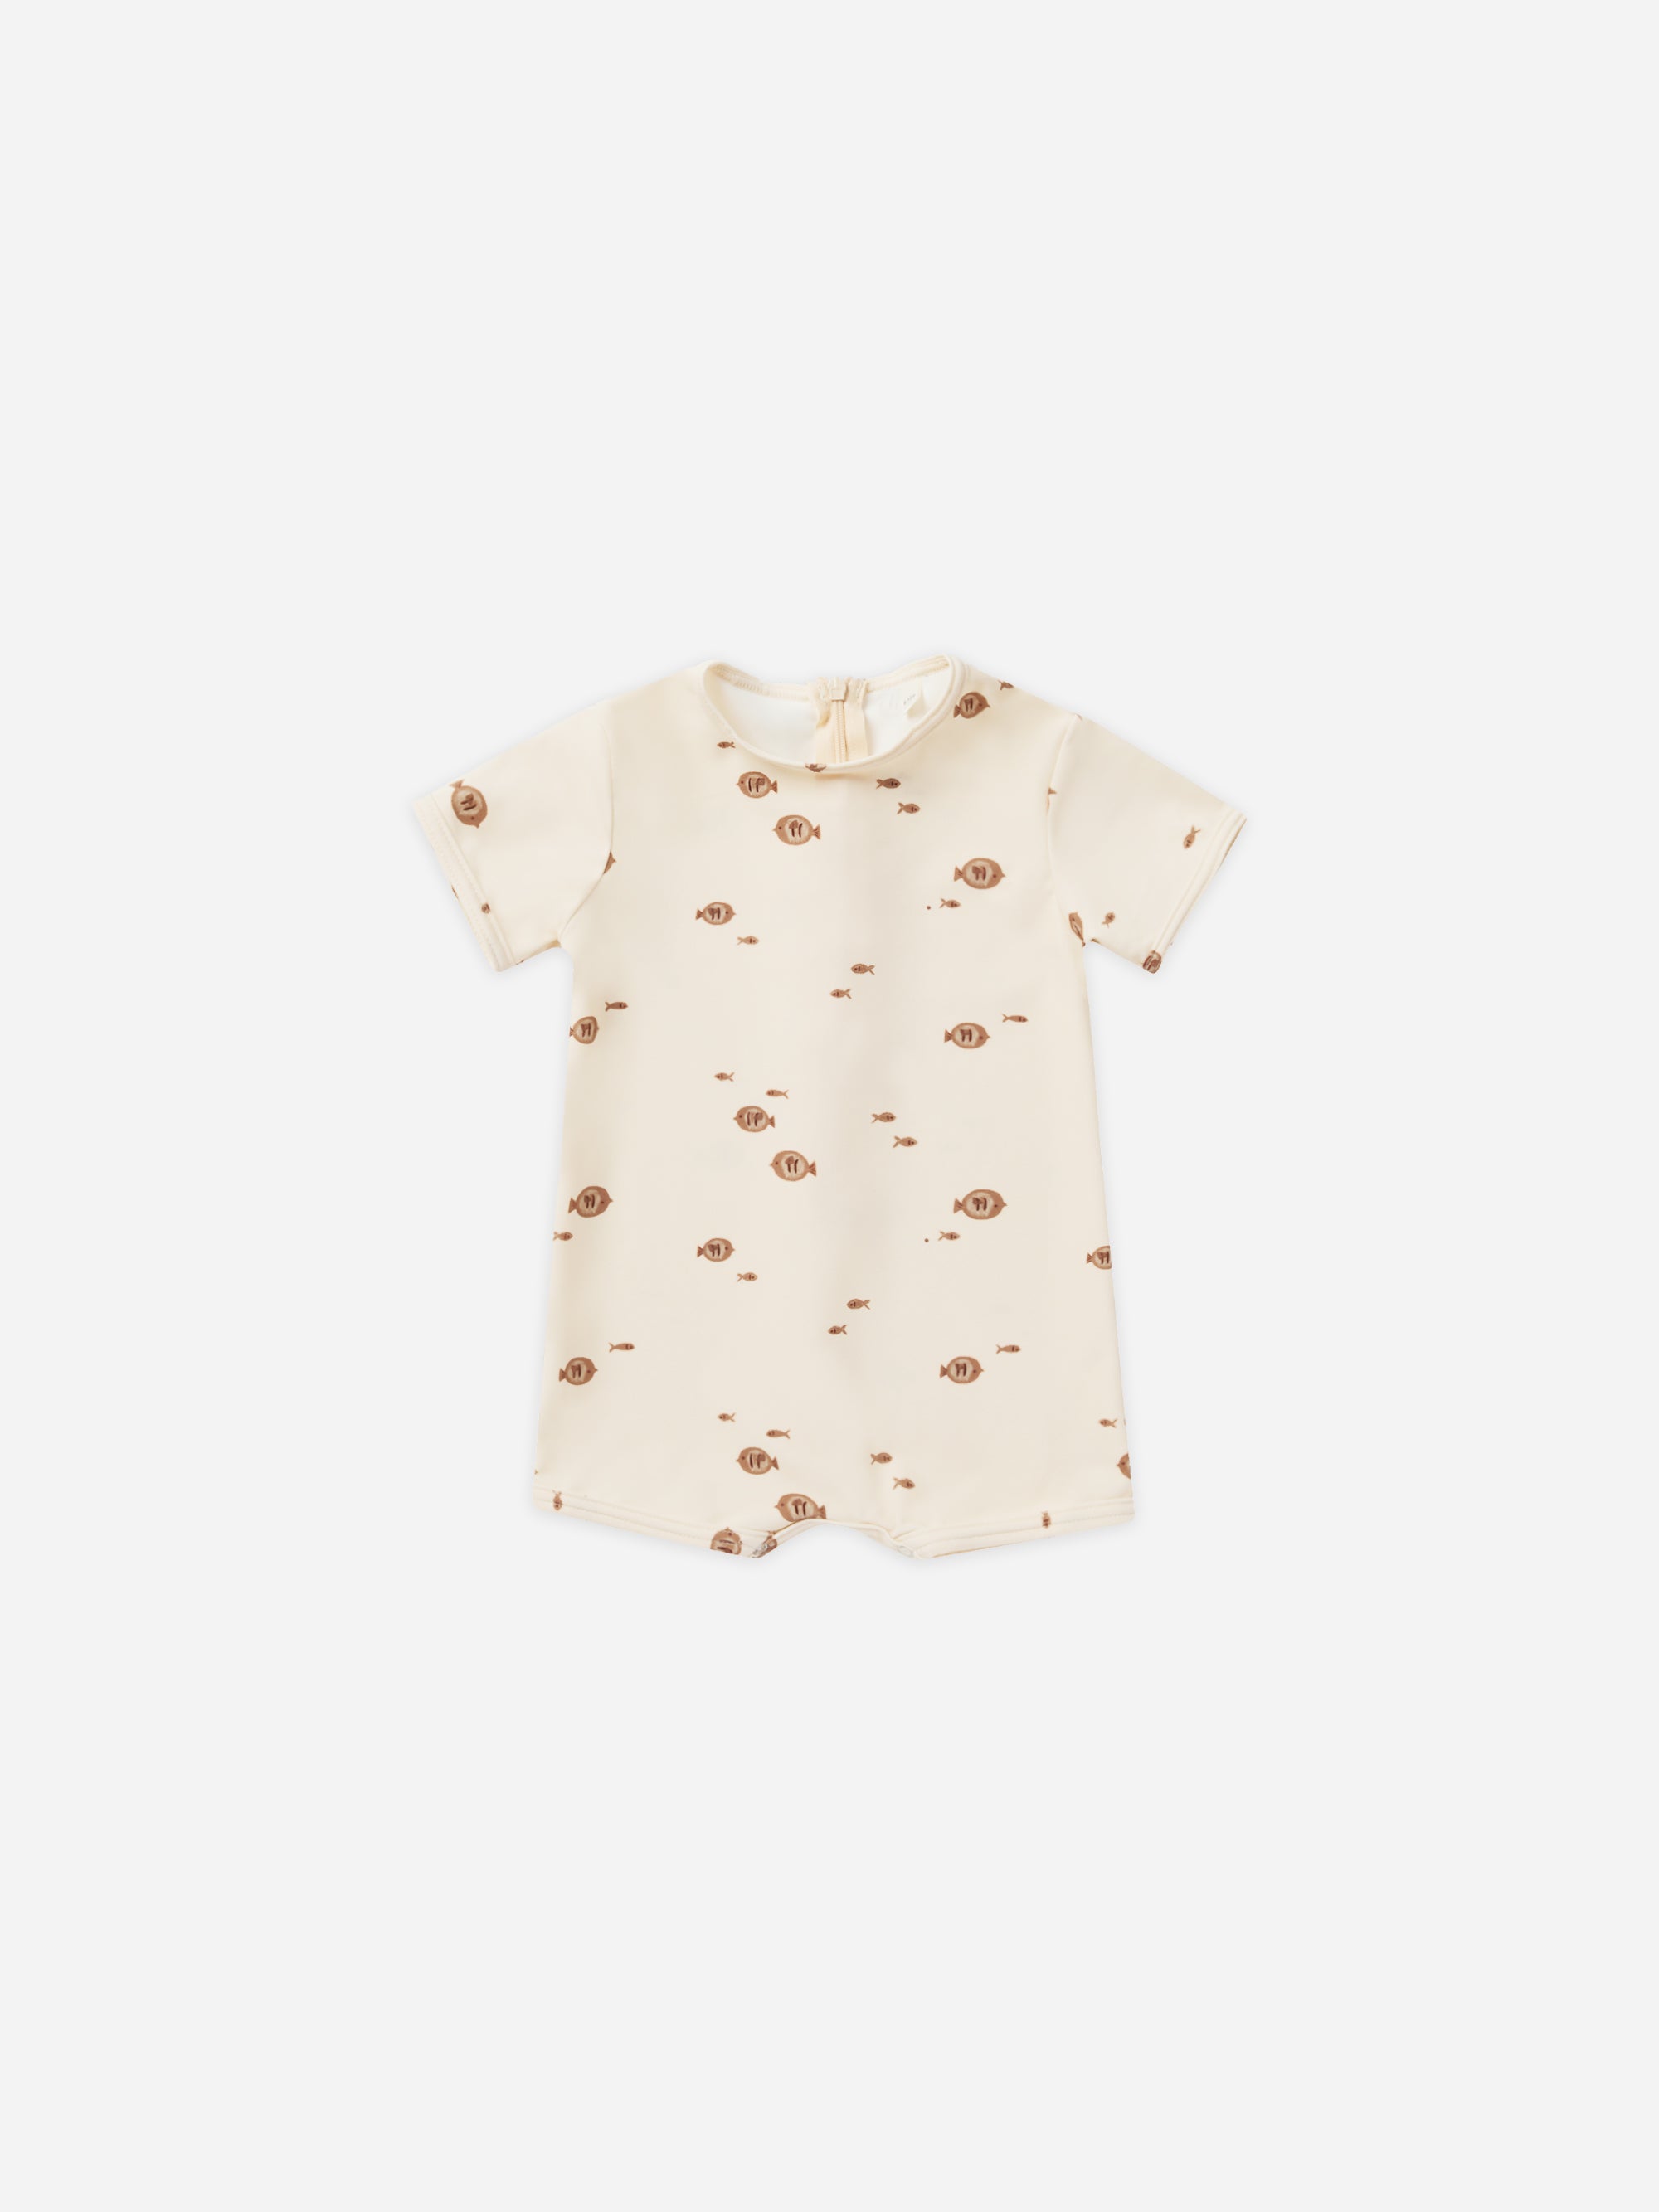 Shorty One-Piece || Fish - Rylee + Cru | Kids Clothes | Trendy Baby Clothes | Modern Infant Outfits |